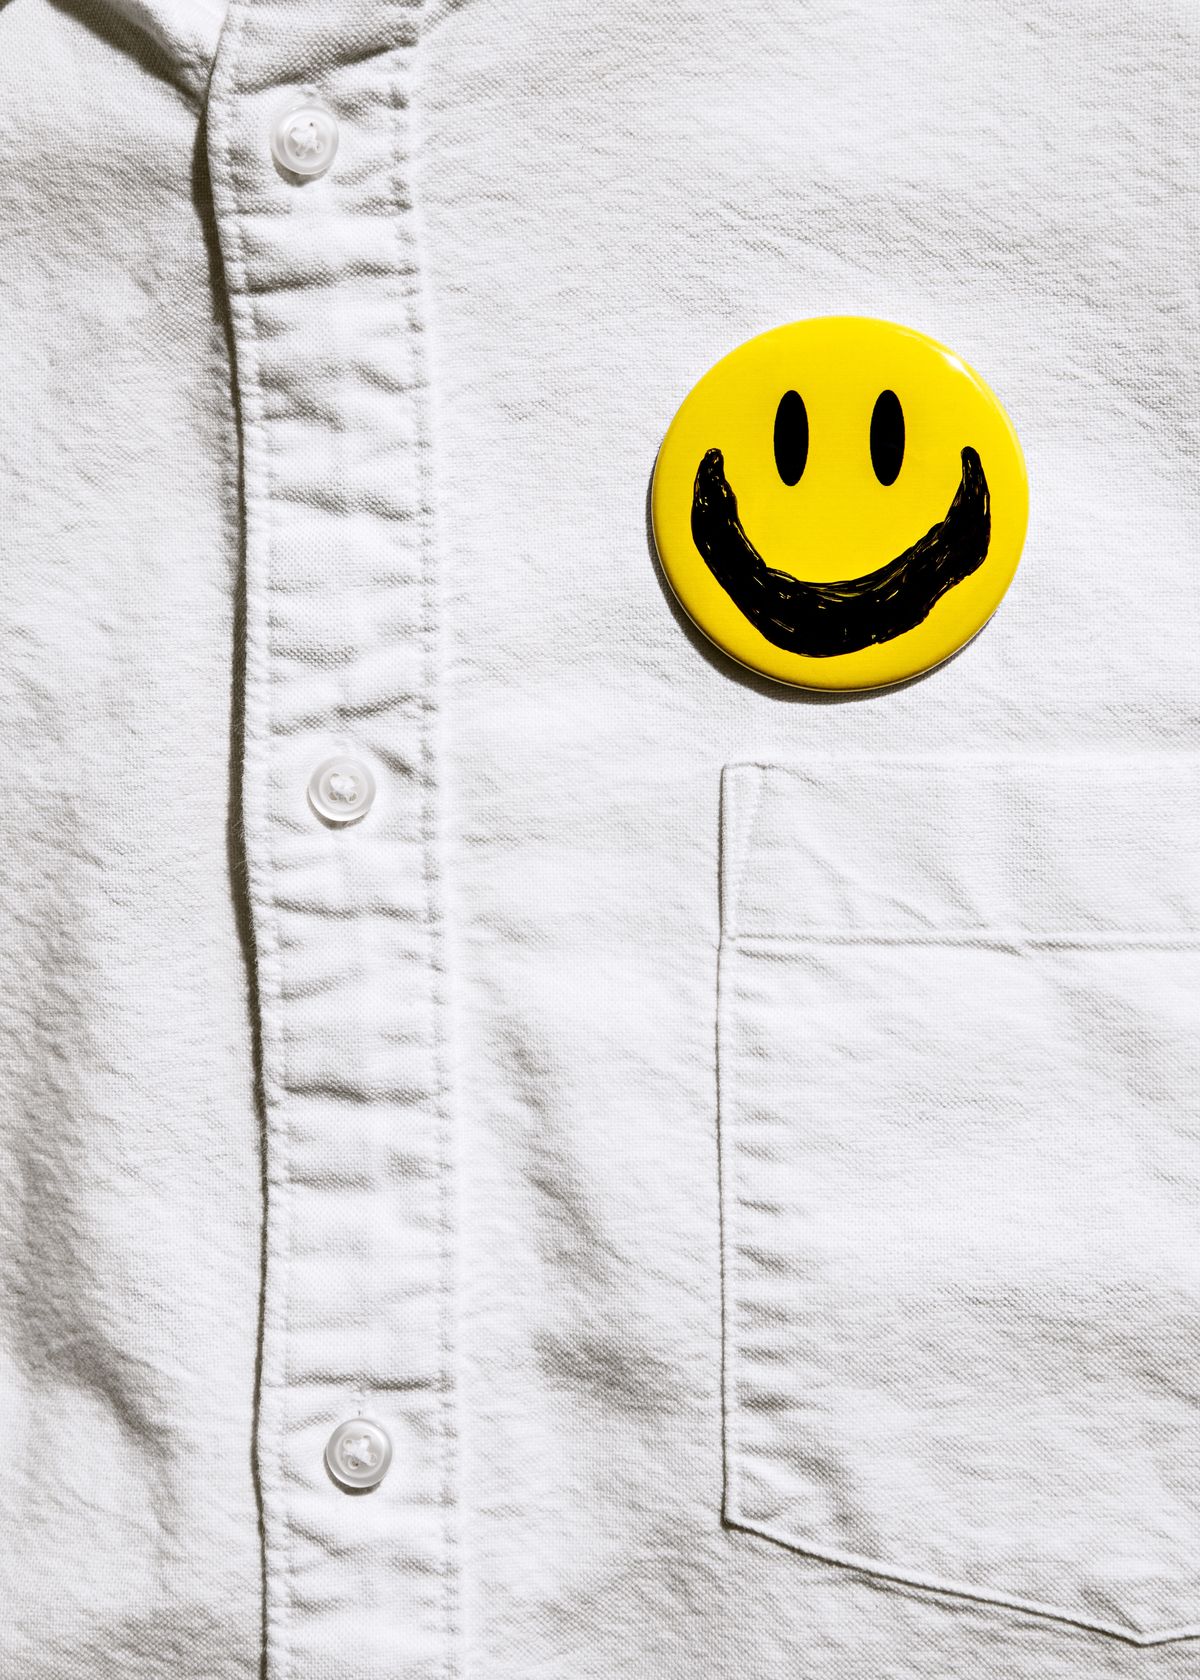 man's shirt with smiley face button on it